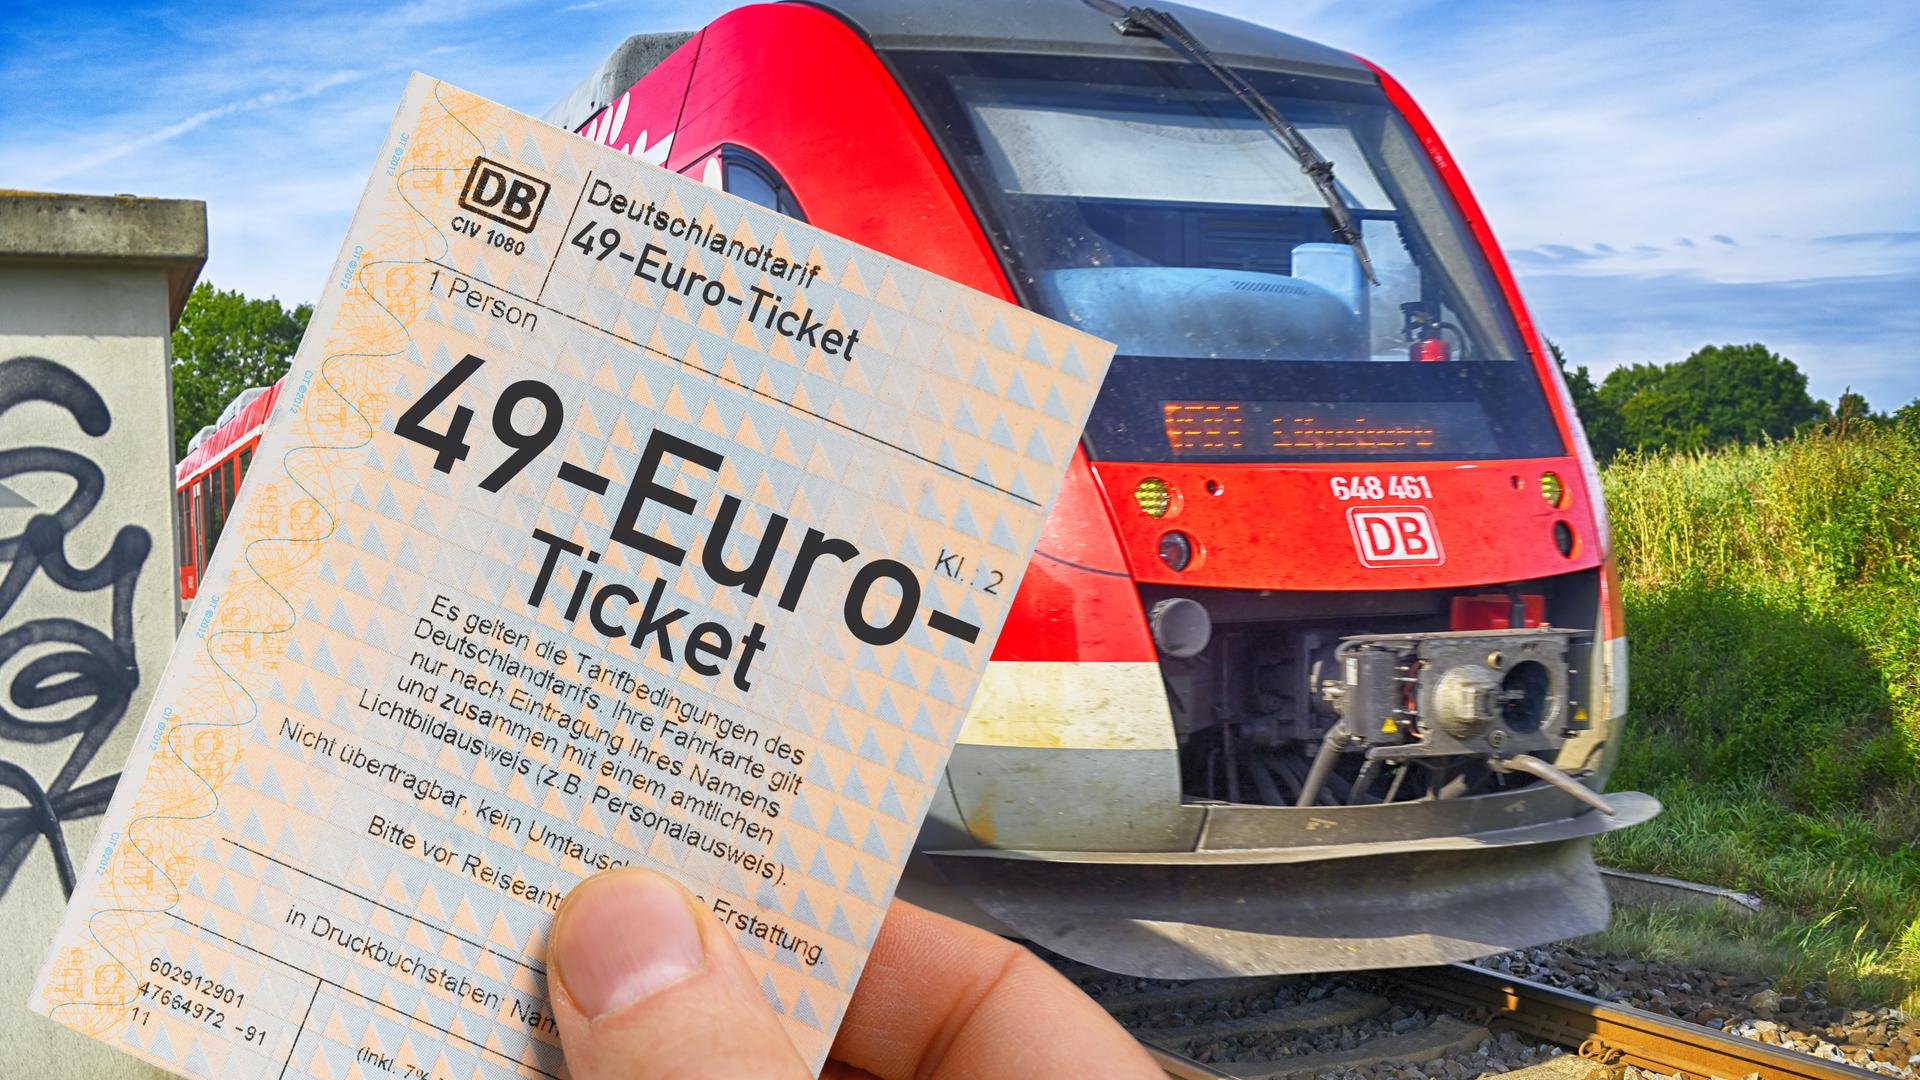 Germany's Commitment to Sustainable Transport: The Evolution of the Deutschlandticket